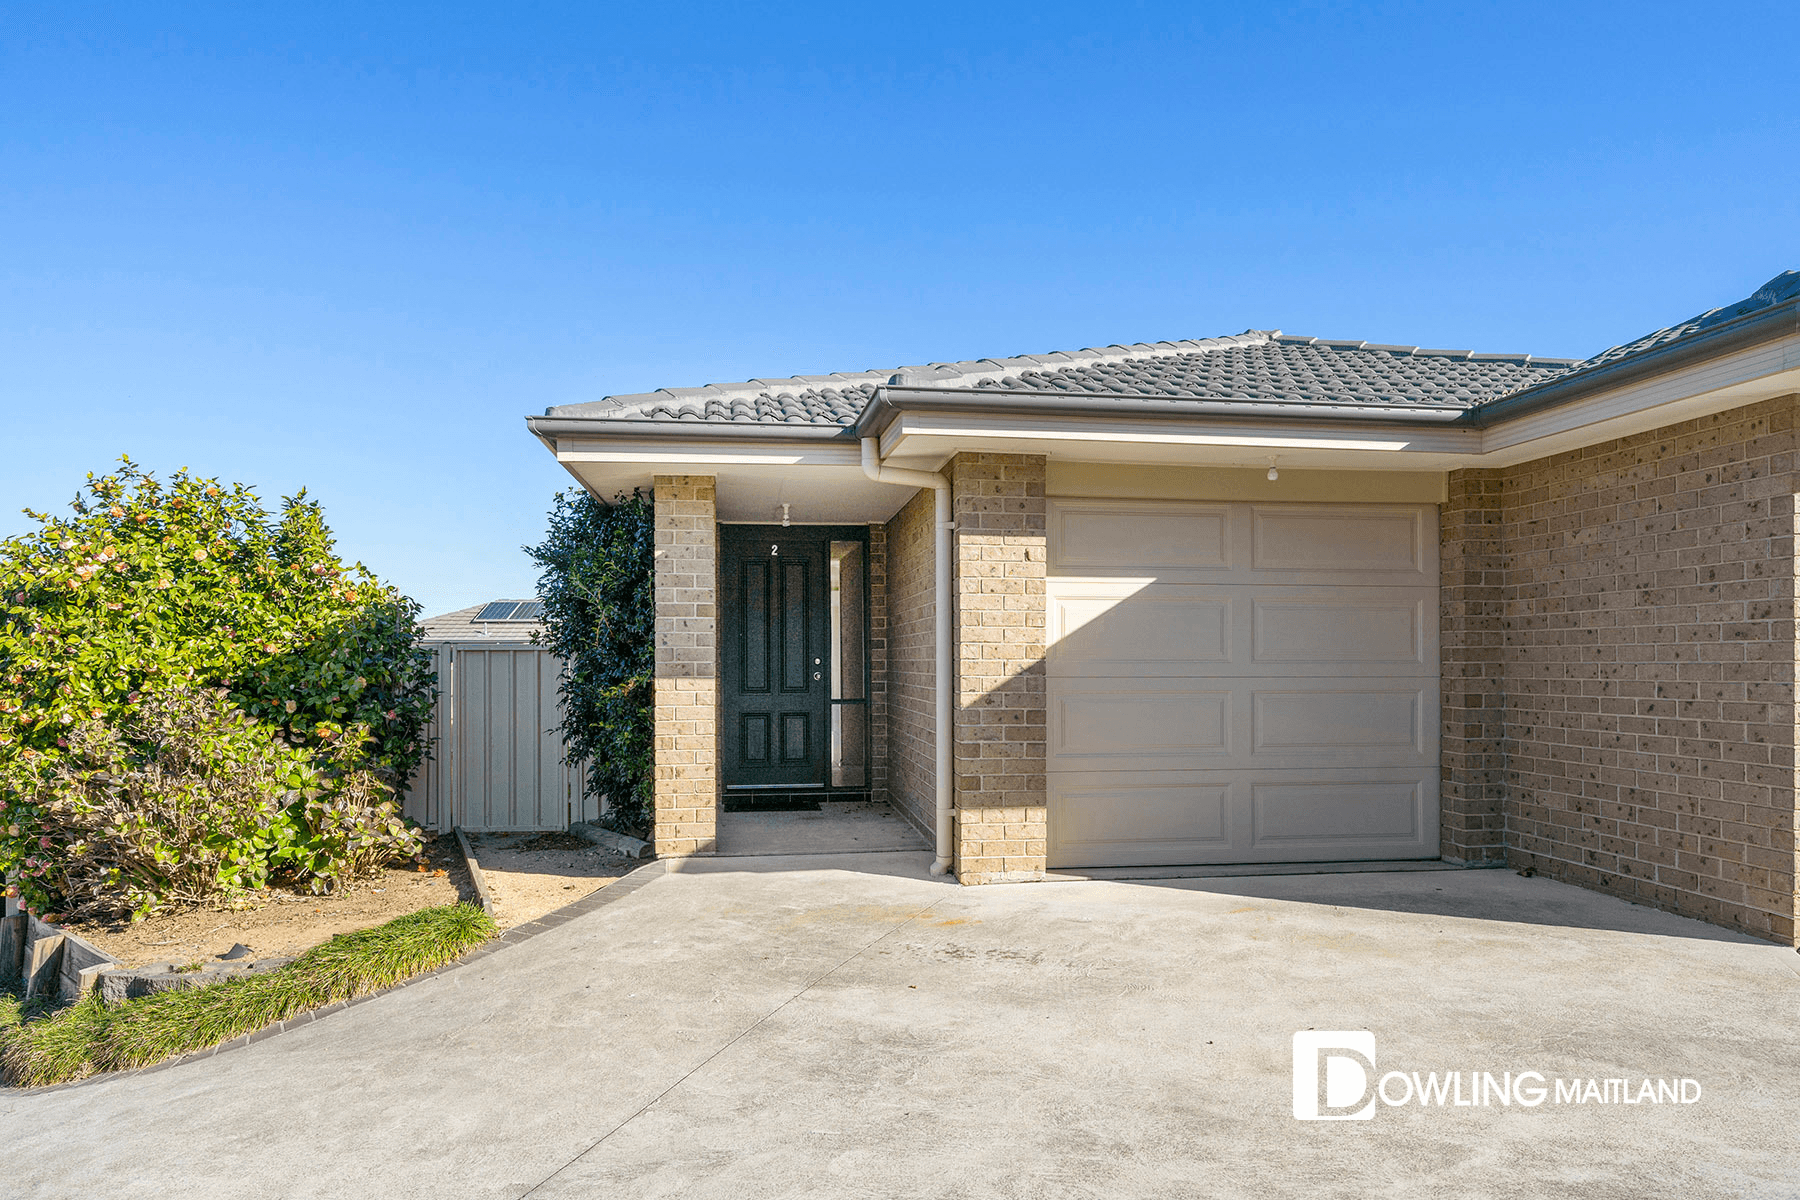 2/8 Neptune Close, Rutherford, NSW 2320